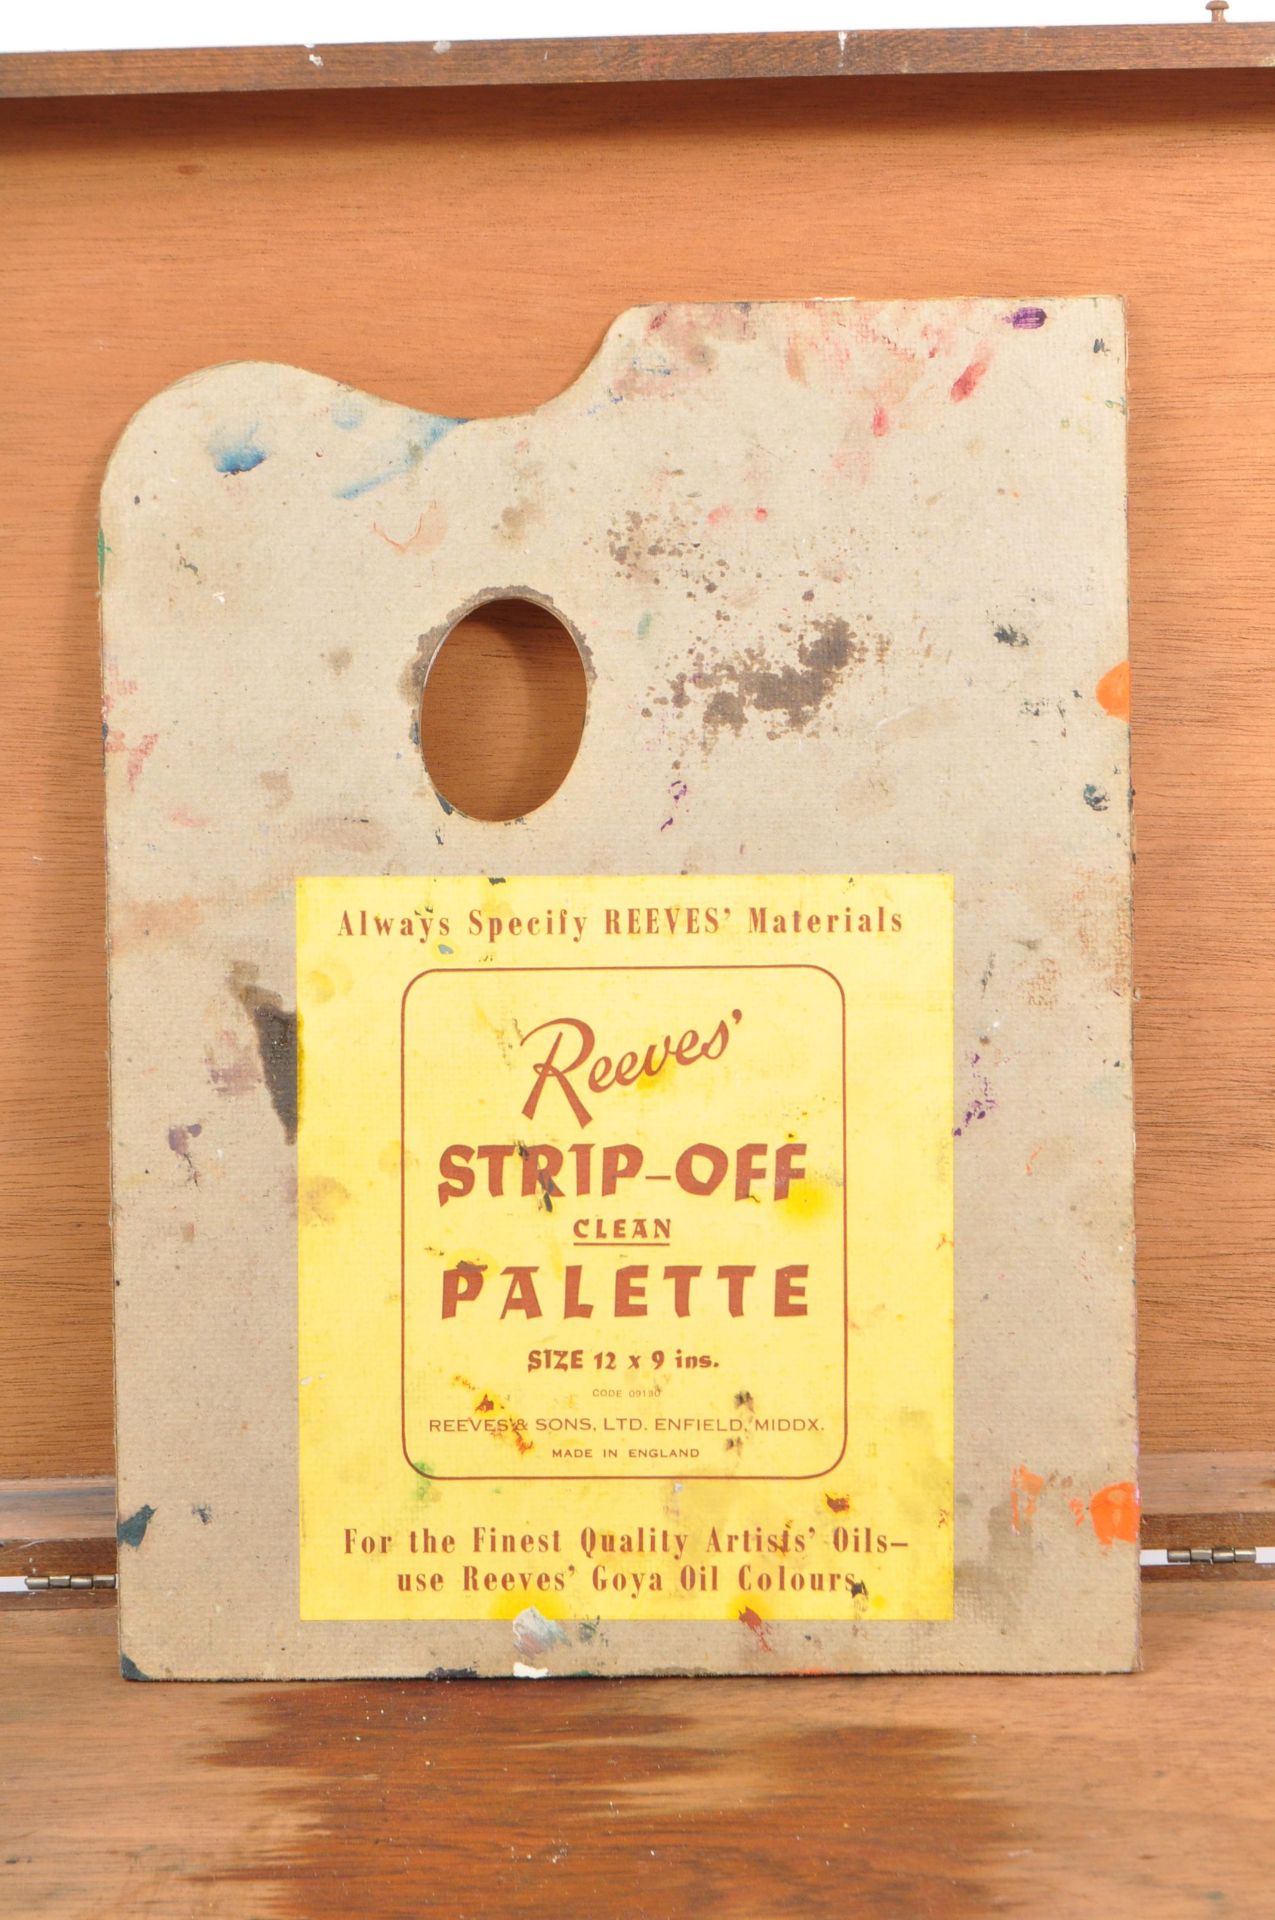 MID 20TH CENTURY ARTIST'S PAINTING PALETTE IN CARRY CASE - Image 2 of 5